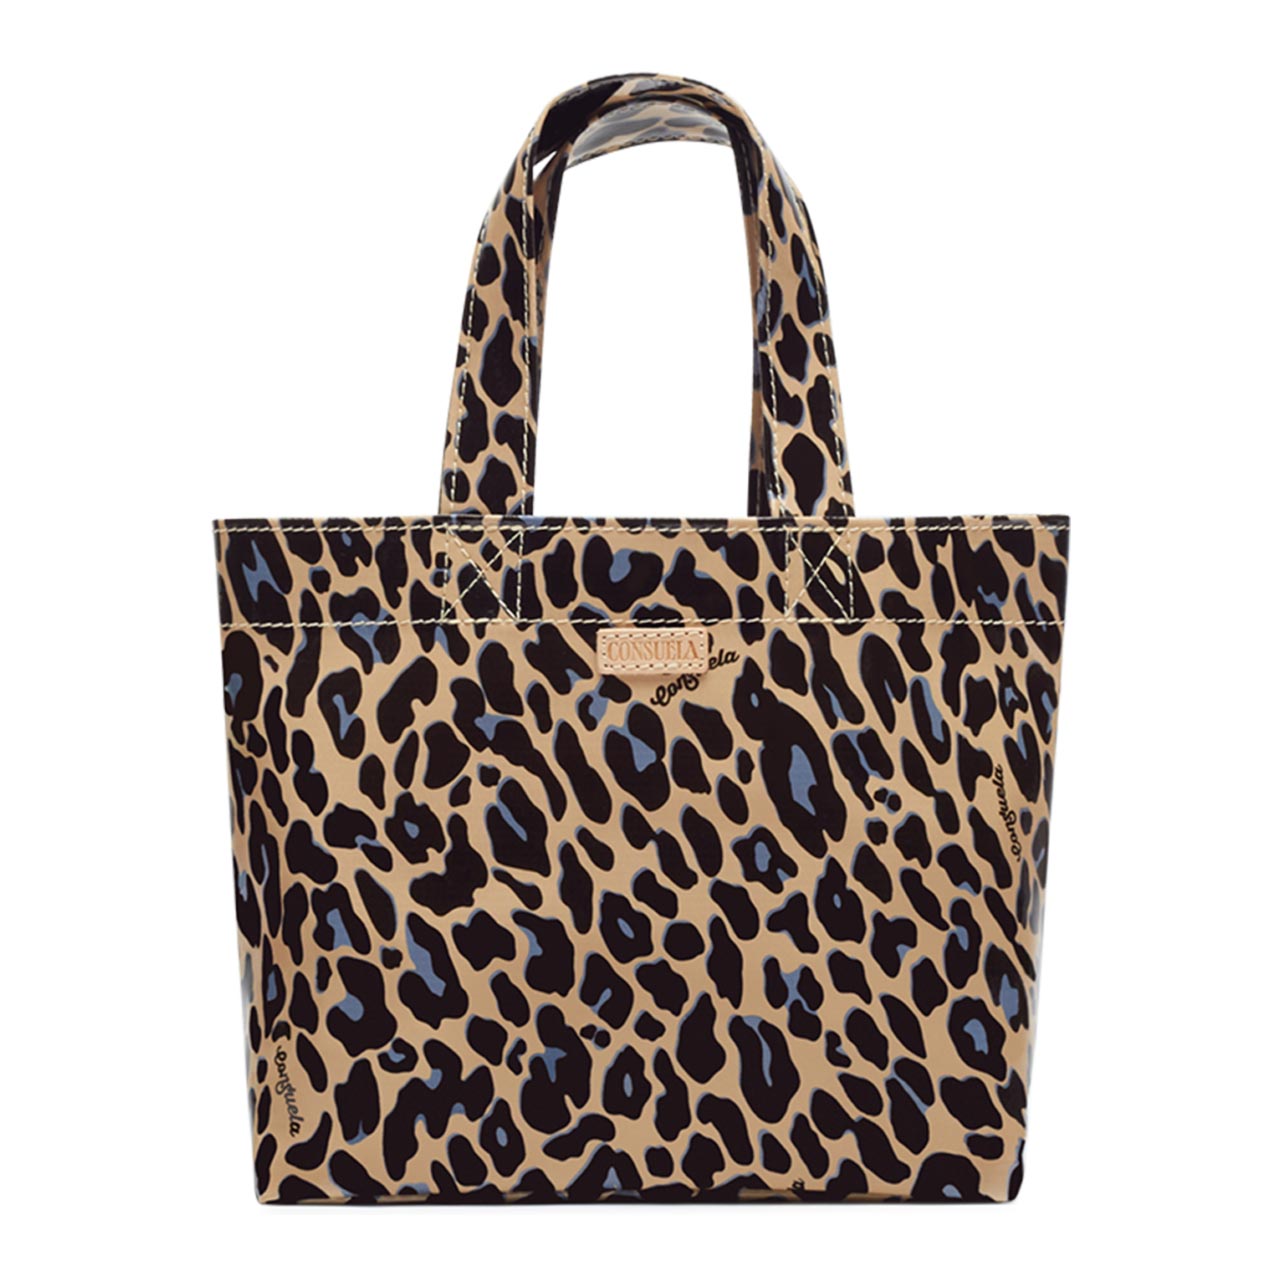 Consuela Bags Blue Jag Mini Bag by Consuela|The Lamp Stand